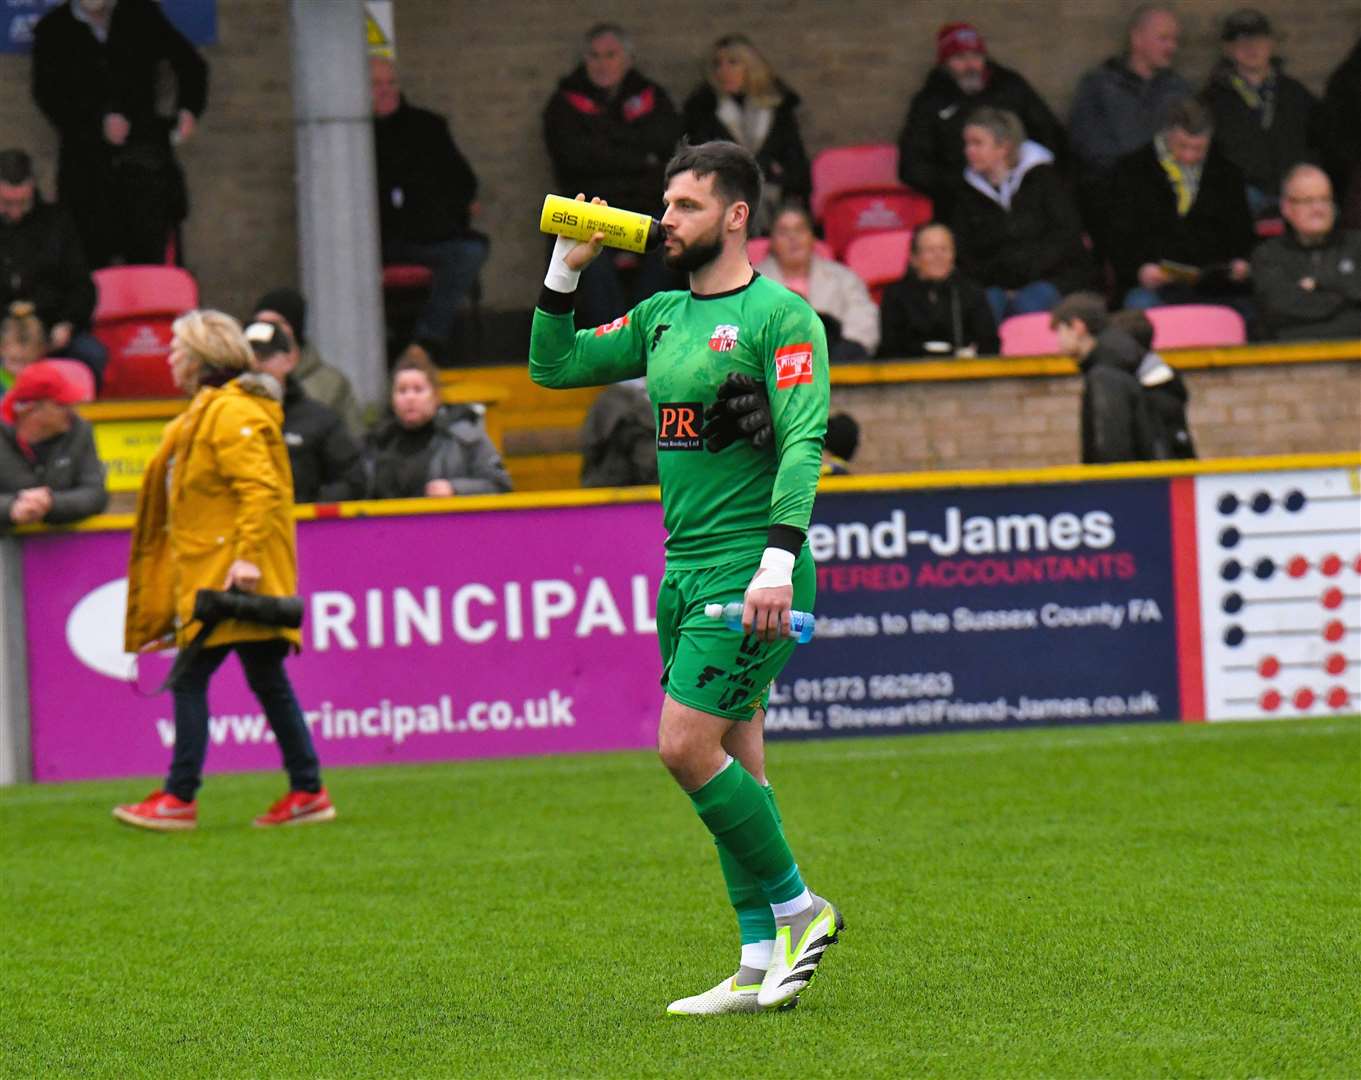 Sheppey goalkeeper Aiden Prall has been sidelined with an injury sustained at work Picture: Marc Richards